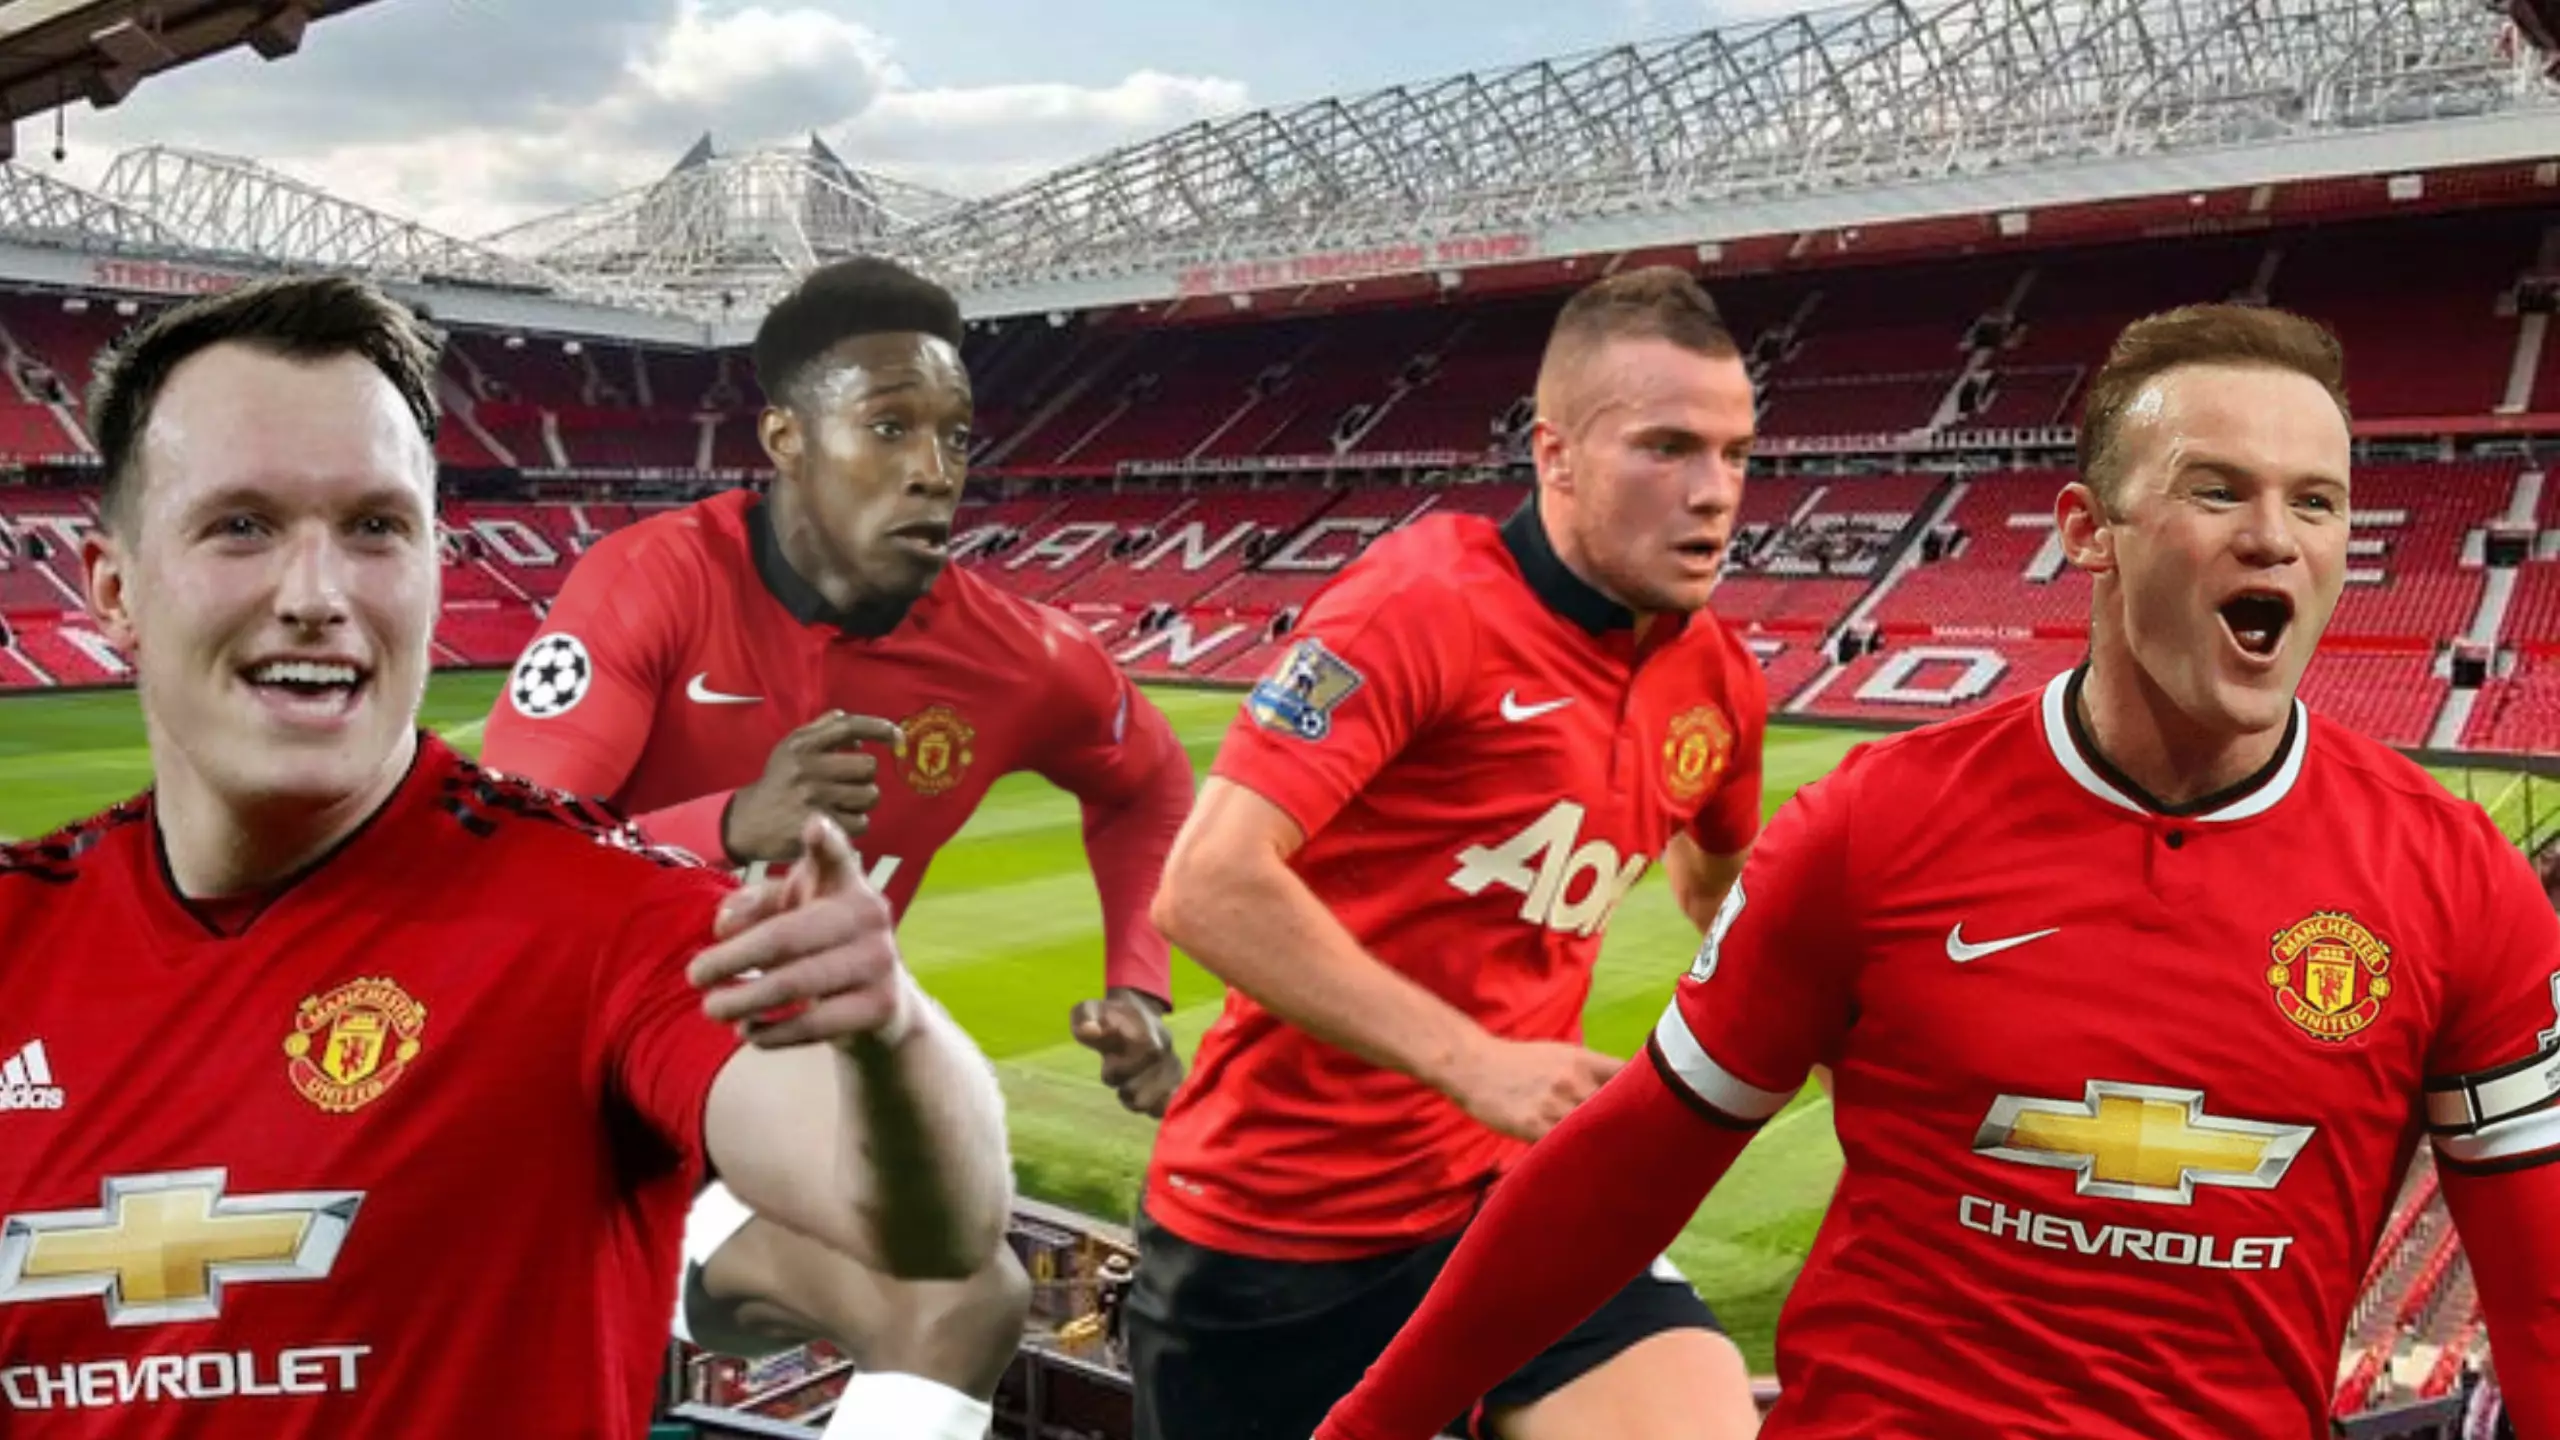 Man Utd's Predicted 'Best XI For 2020' Released In 2011 Is Horribly Wrong